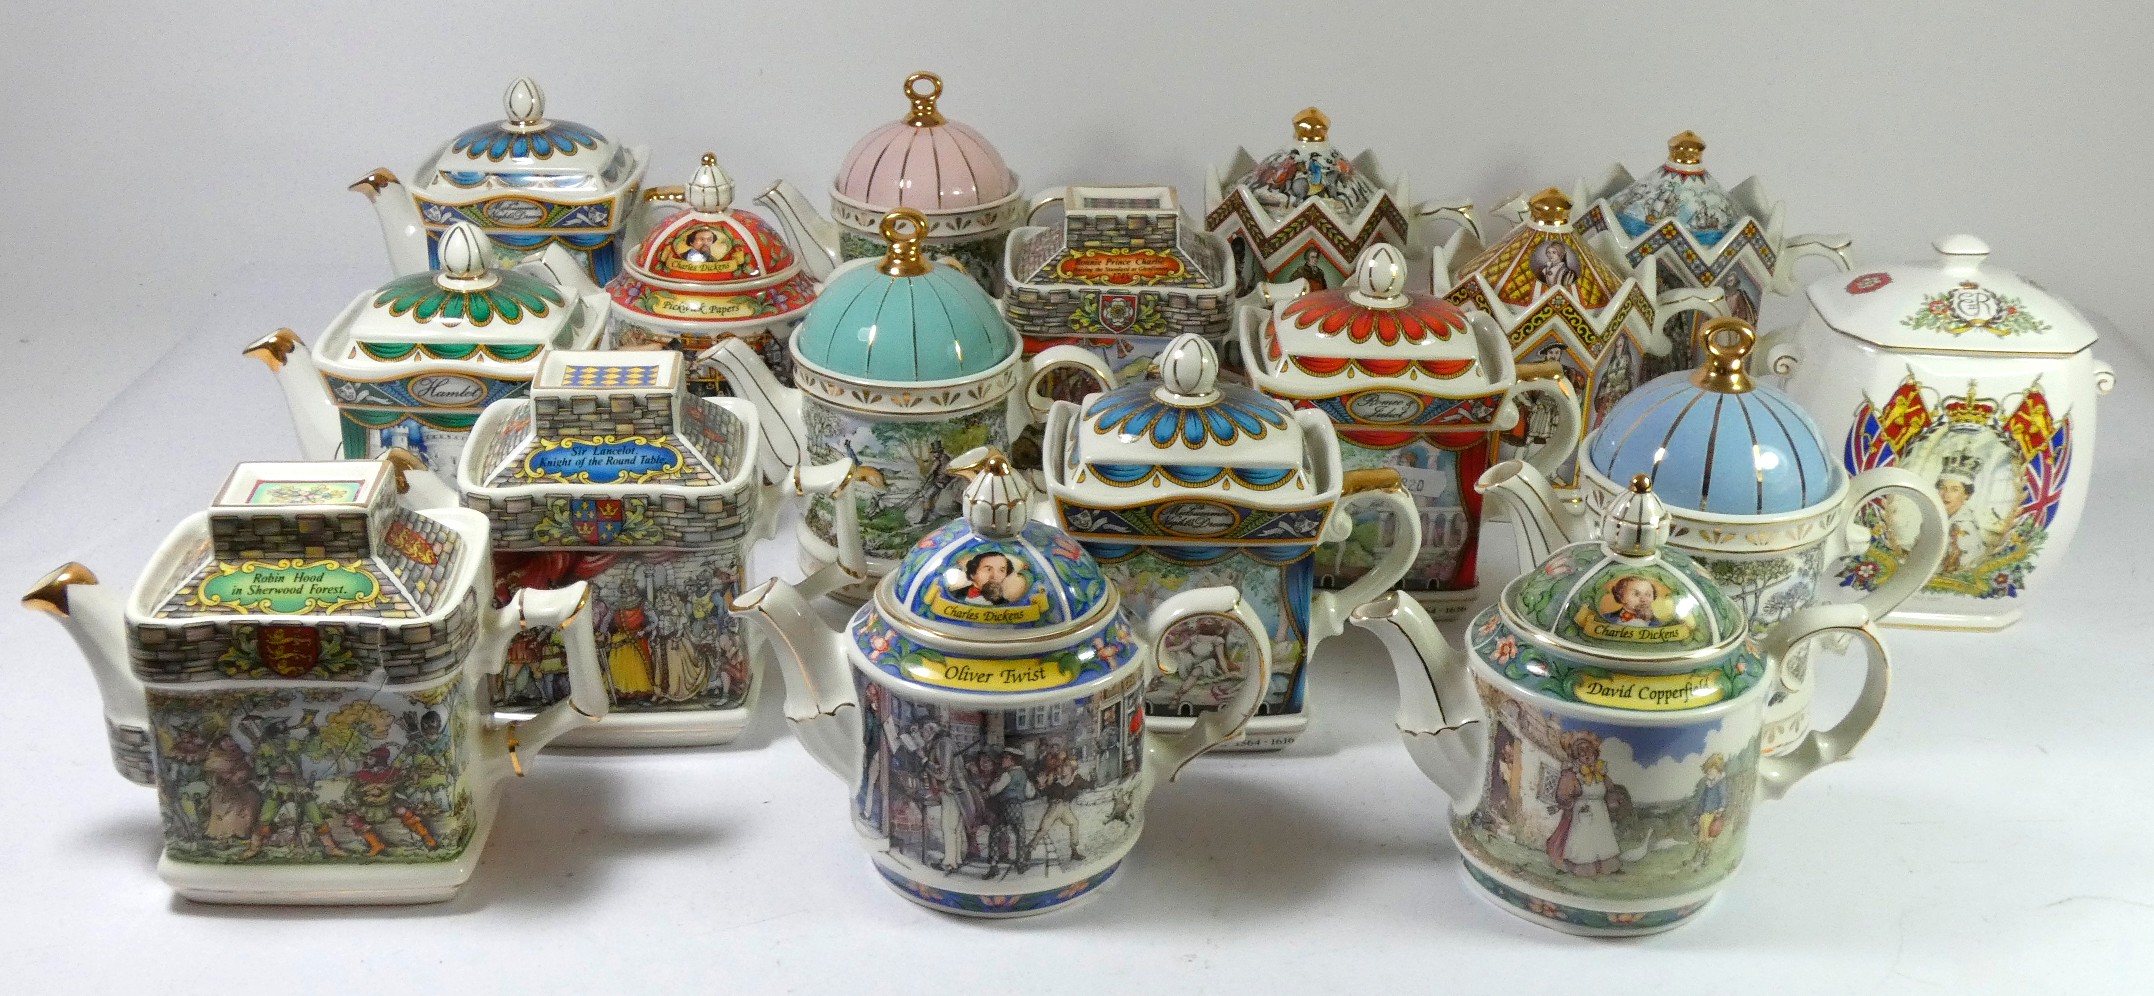 A collection of sixteen Staffordshire commemorative teapots by Sadler, to include Historical Series,